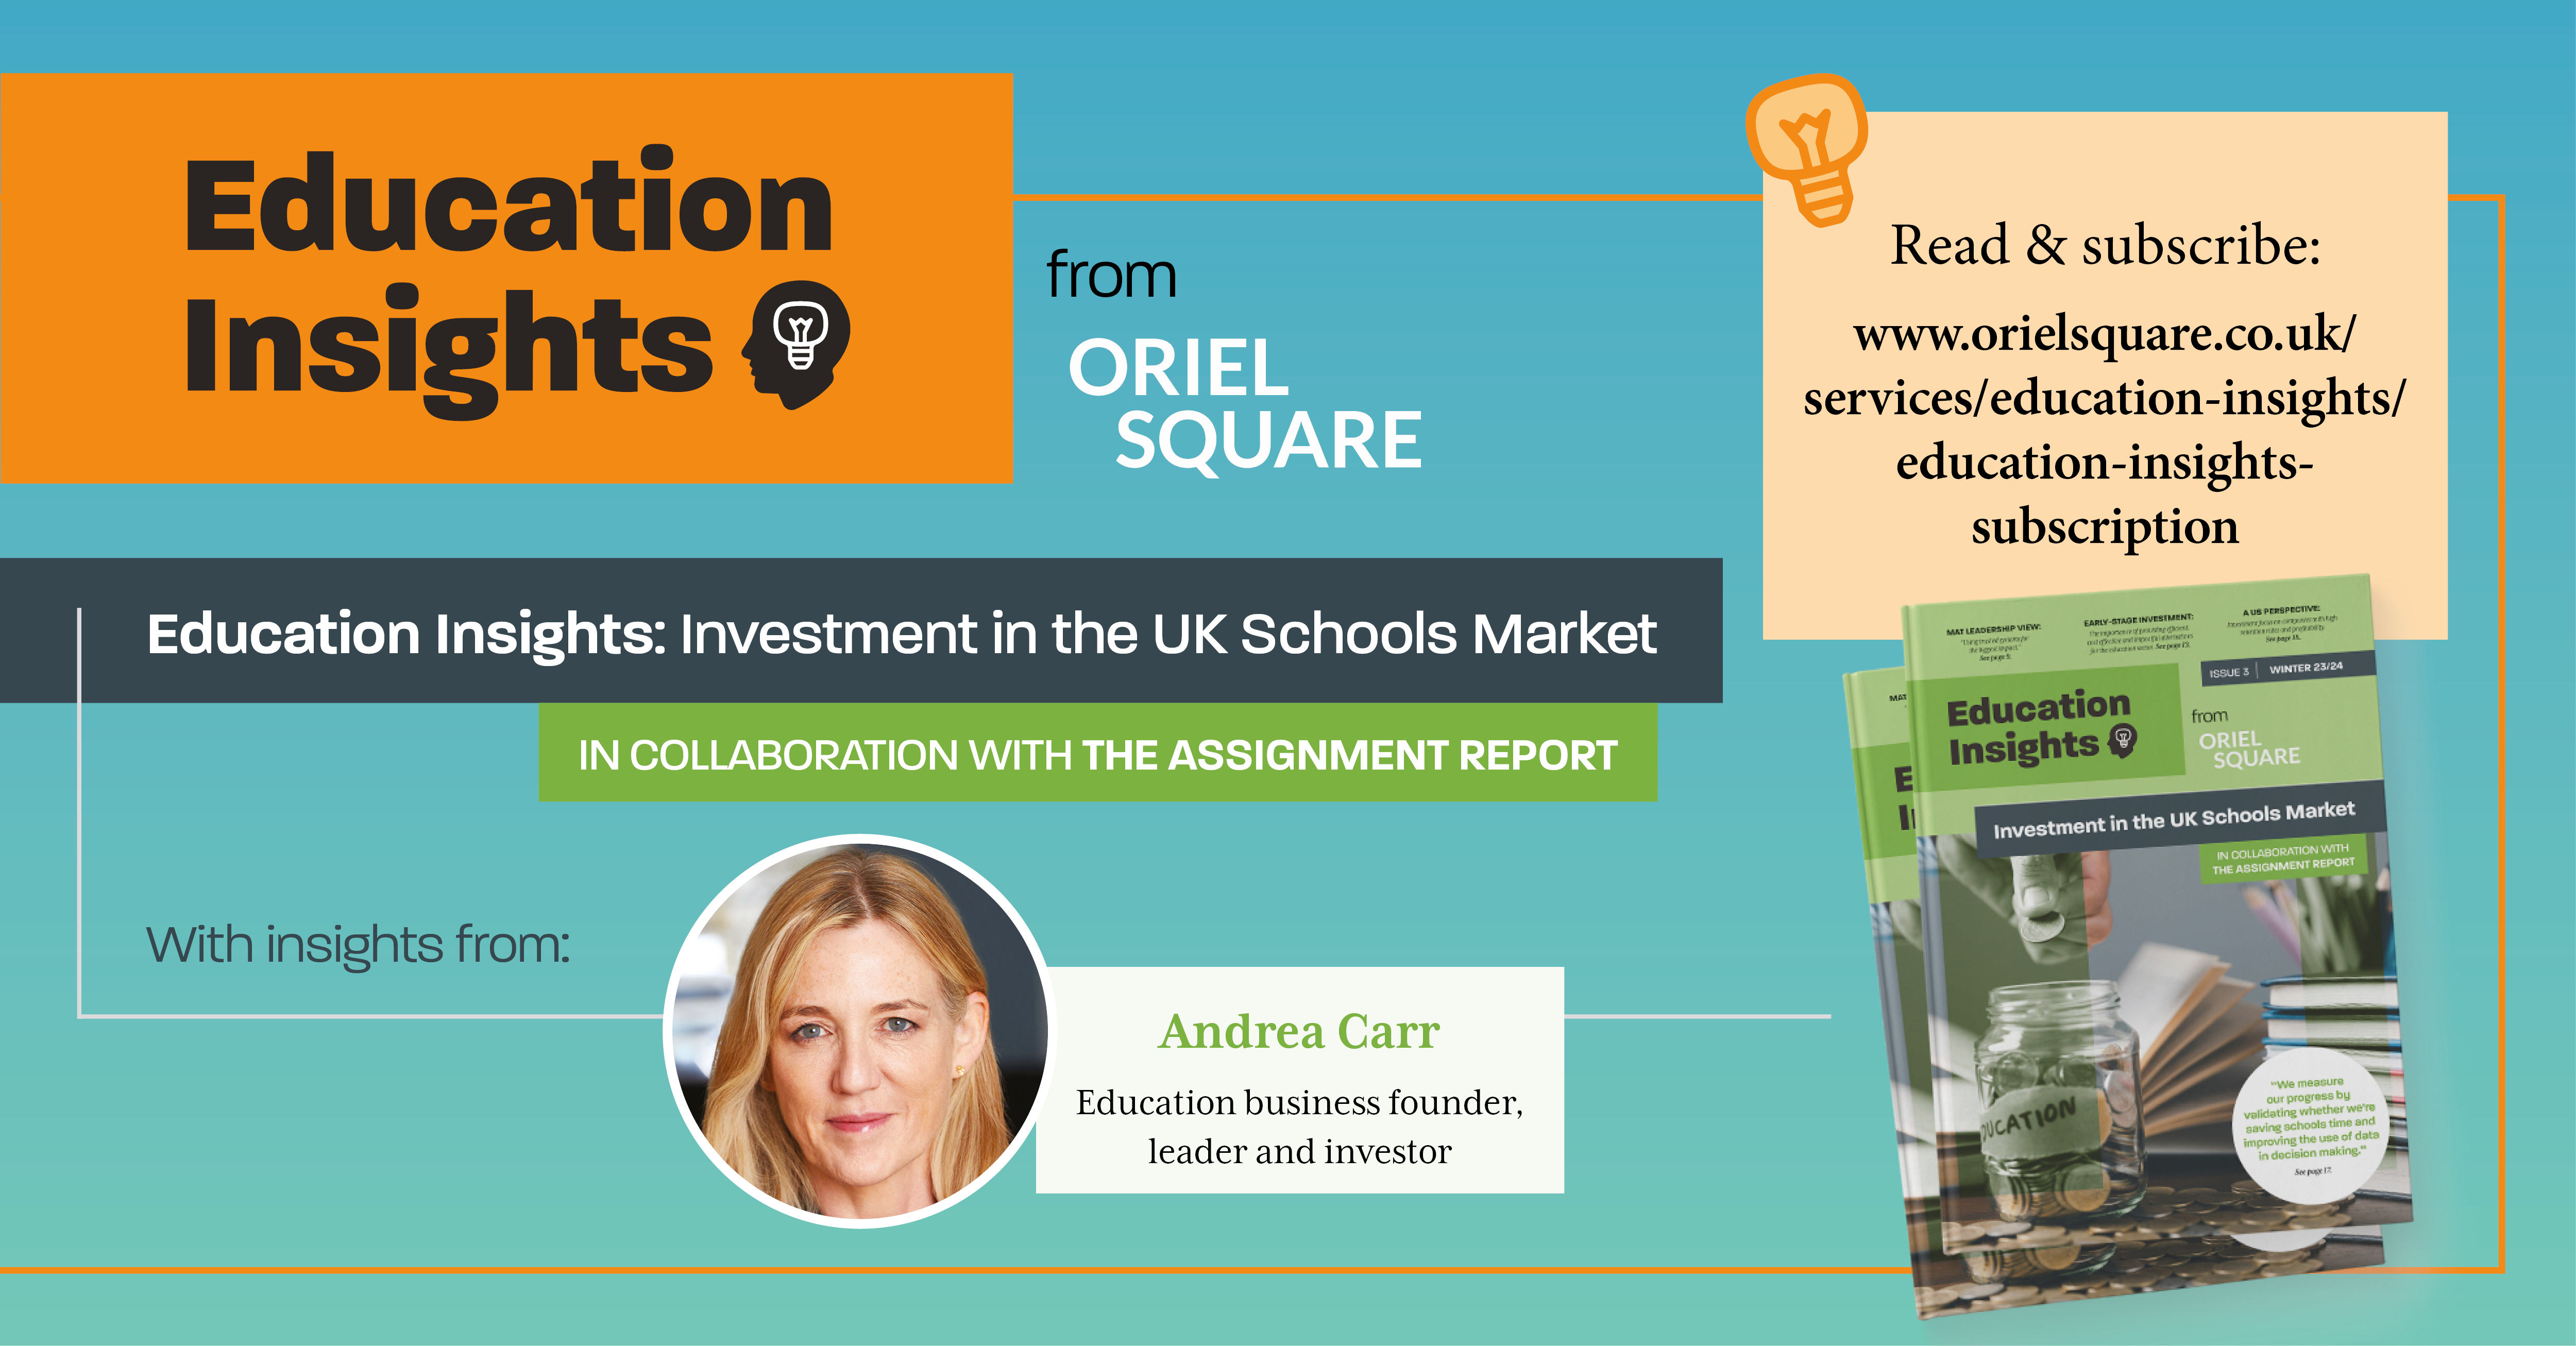 Read & subscribe: https://www.orielsquare.co.uk/services/education-insights/education-insights-subscription/ Education Insights: Investment in the UK Schools Market In collaboration with The Assignment Report With insights from: Andrea Carr Education business founder, leader and investor.